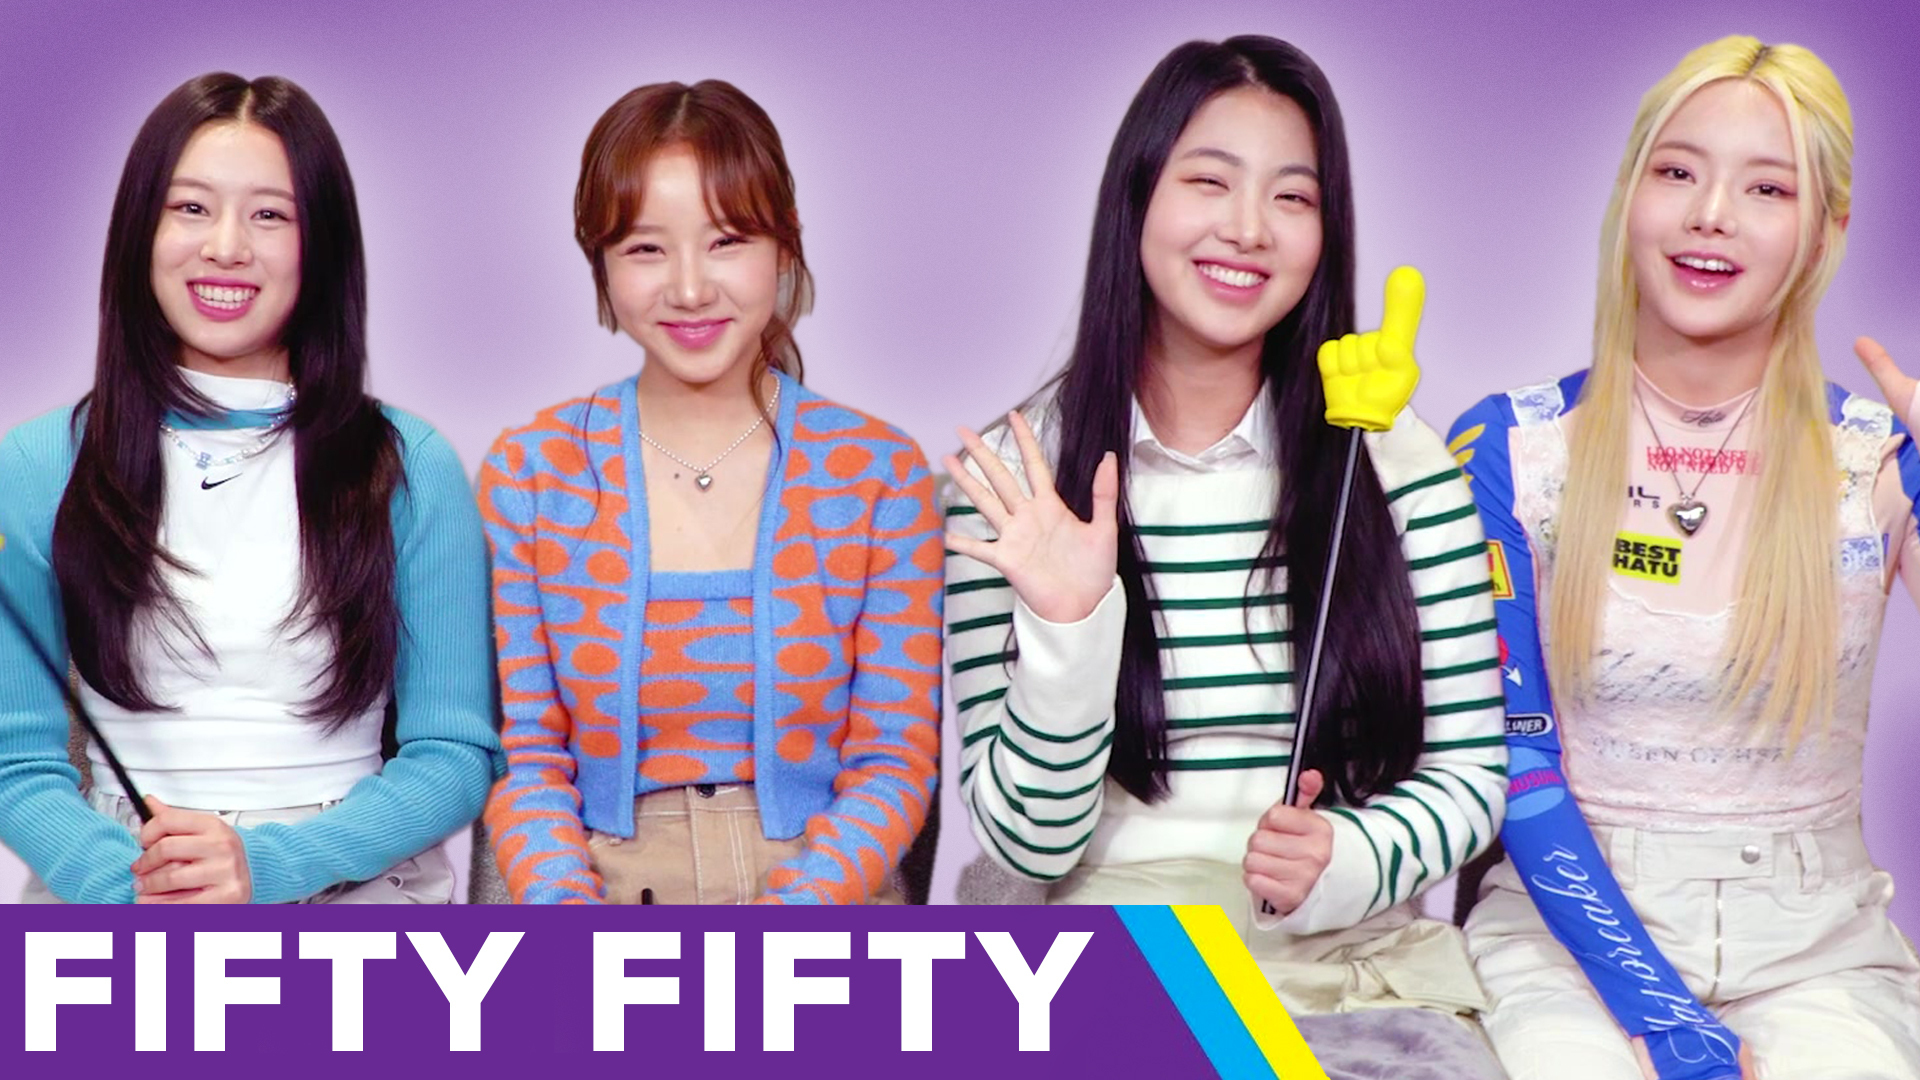 Cupid' by Fifty Fifty is 1st female K-pop group song to enter Top